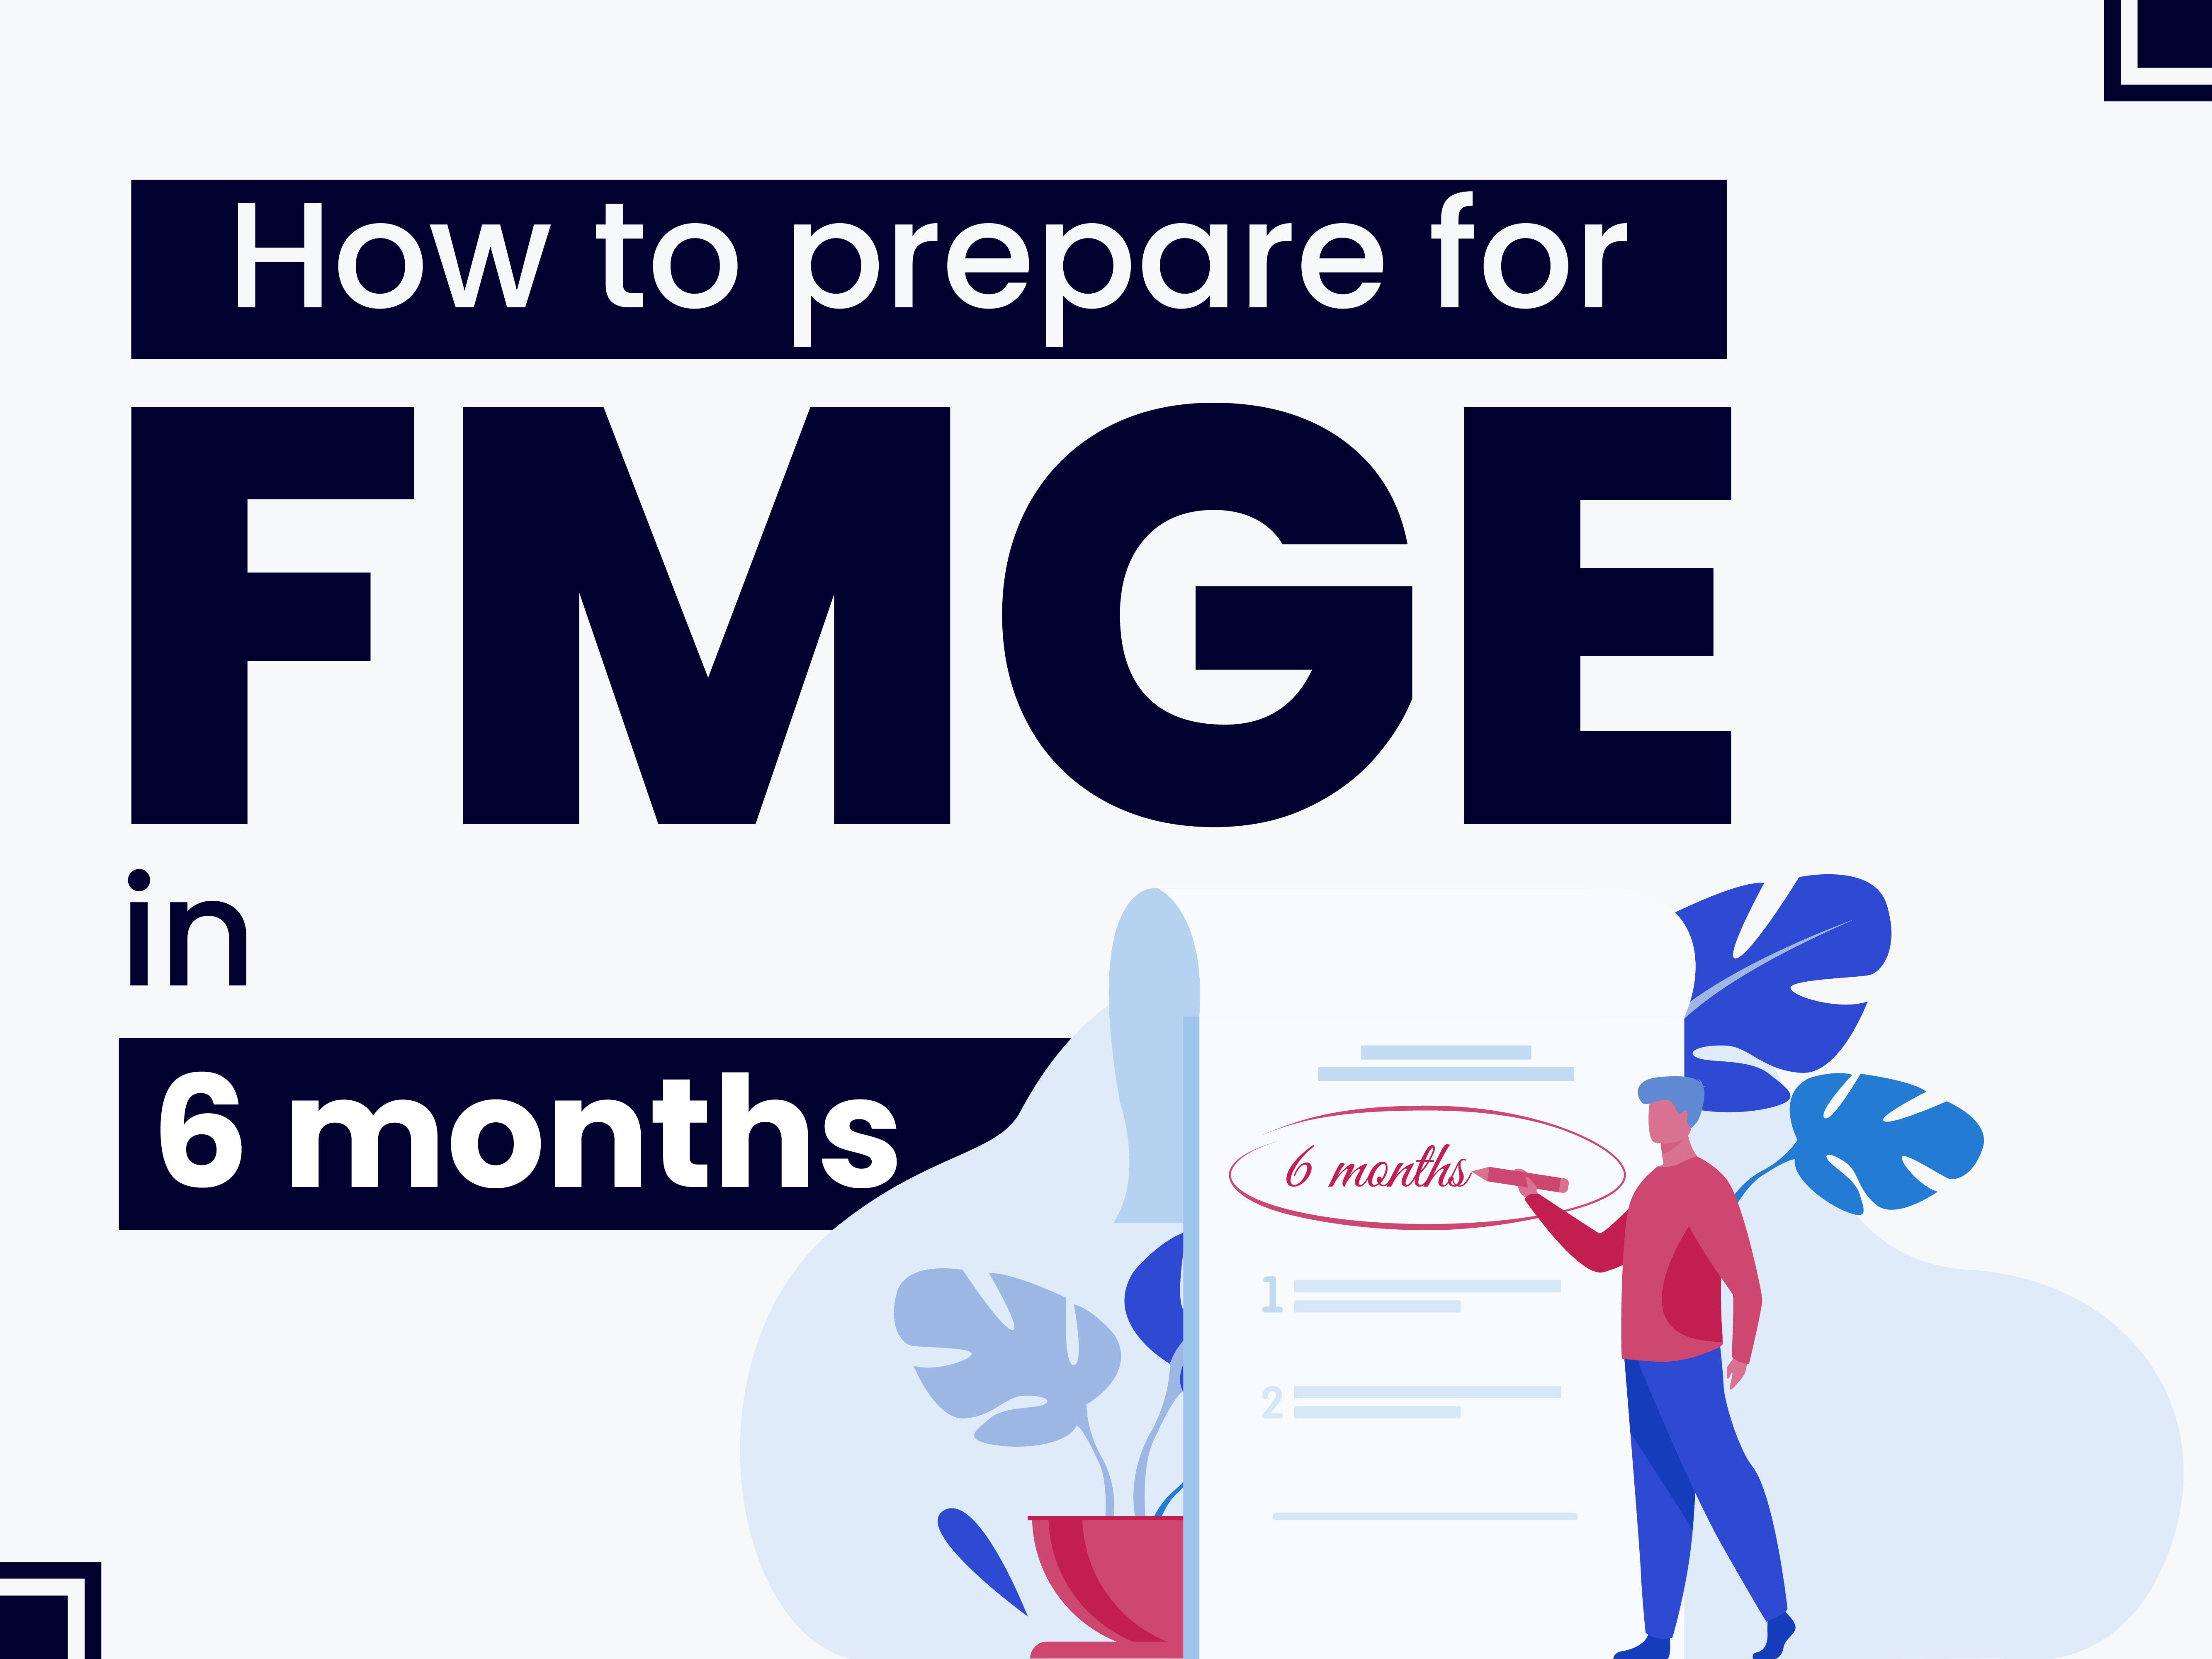 How to prepare for FMGE in 6 months